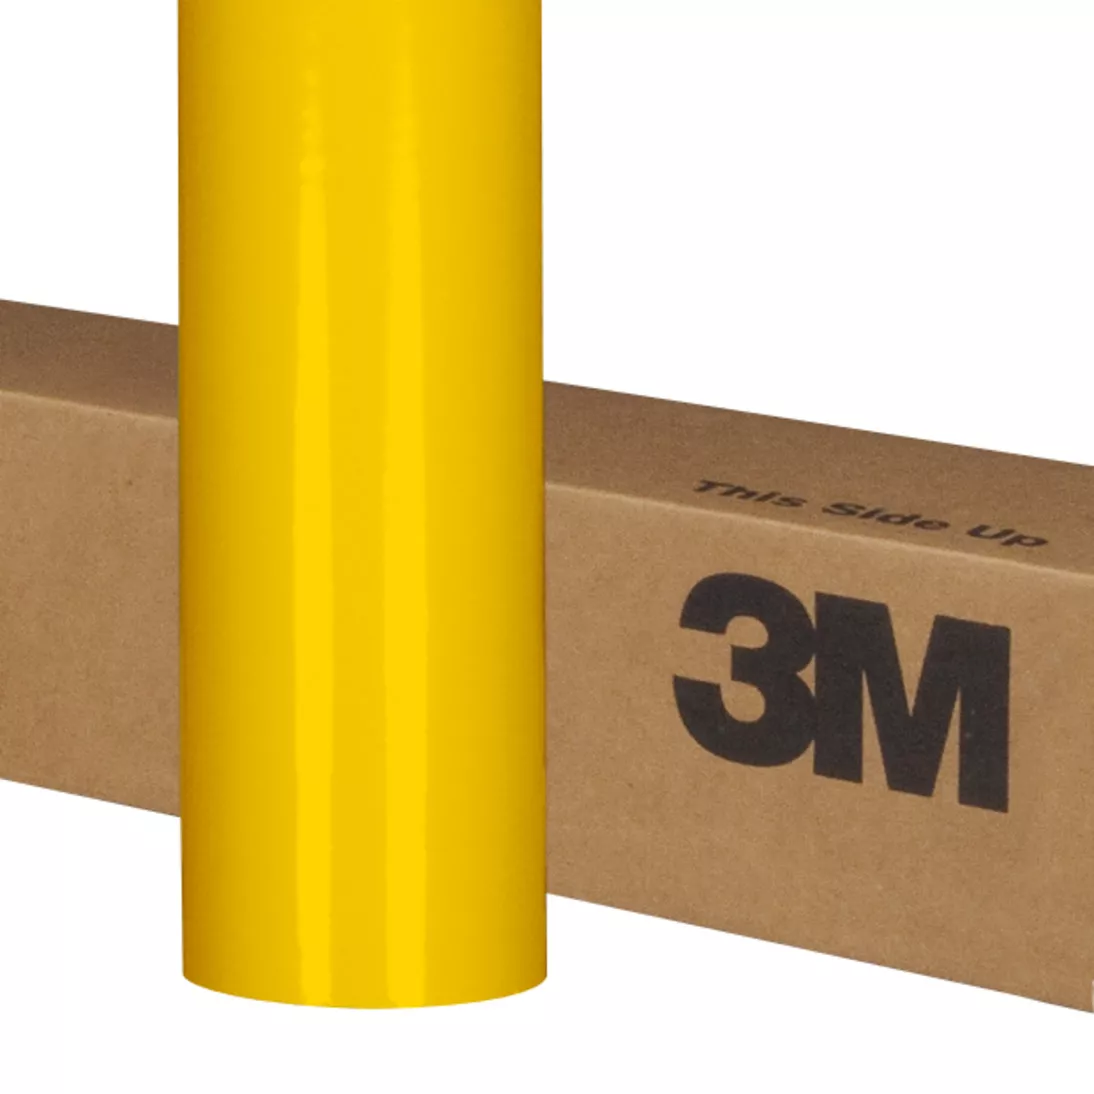 3M™ Scotchcal™ Translucent Graphic Film 3630-015, Yellow, 48 in x 250 yd